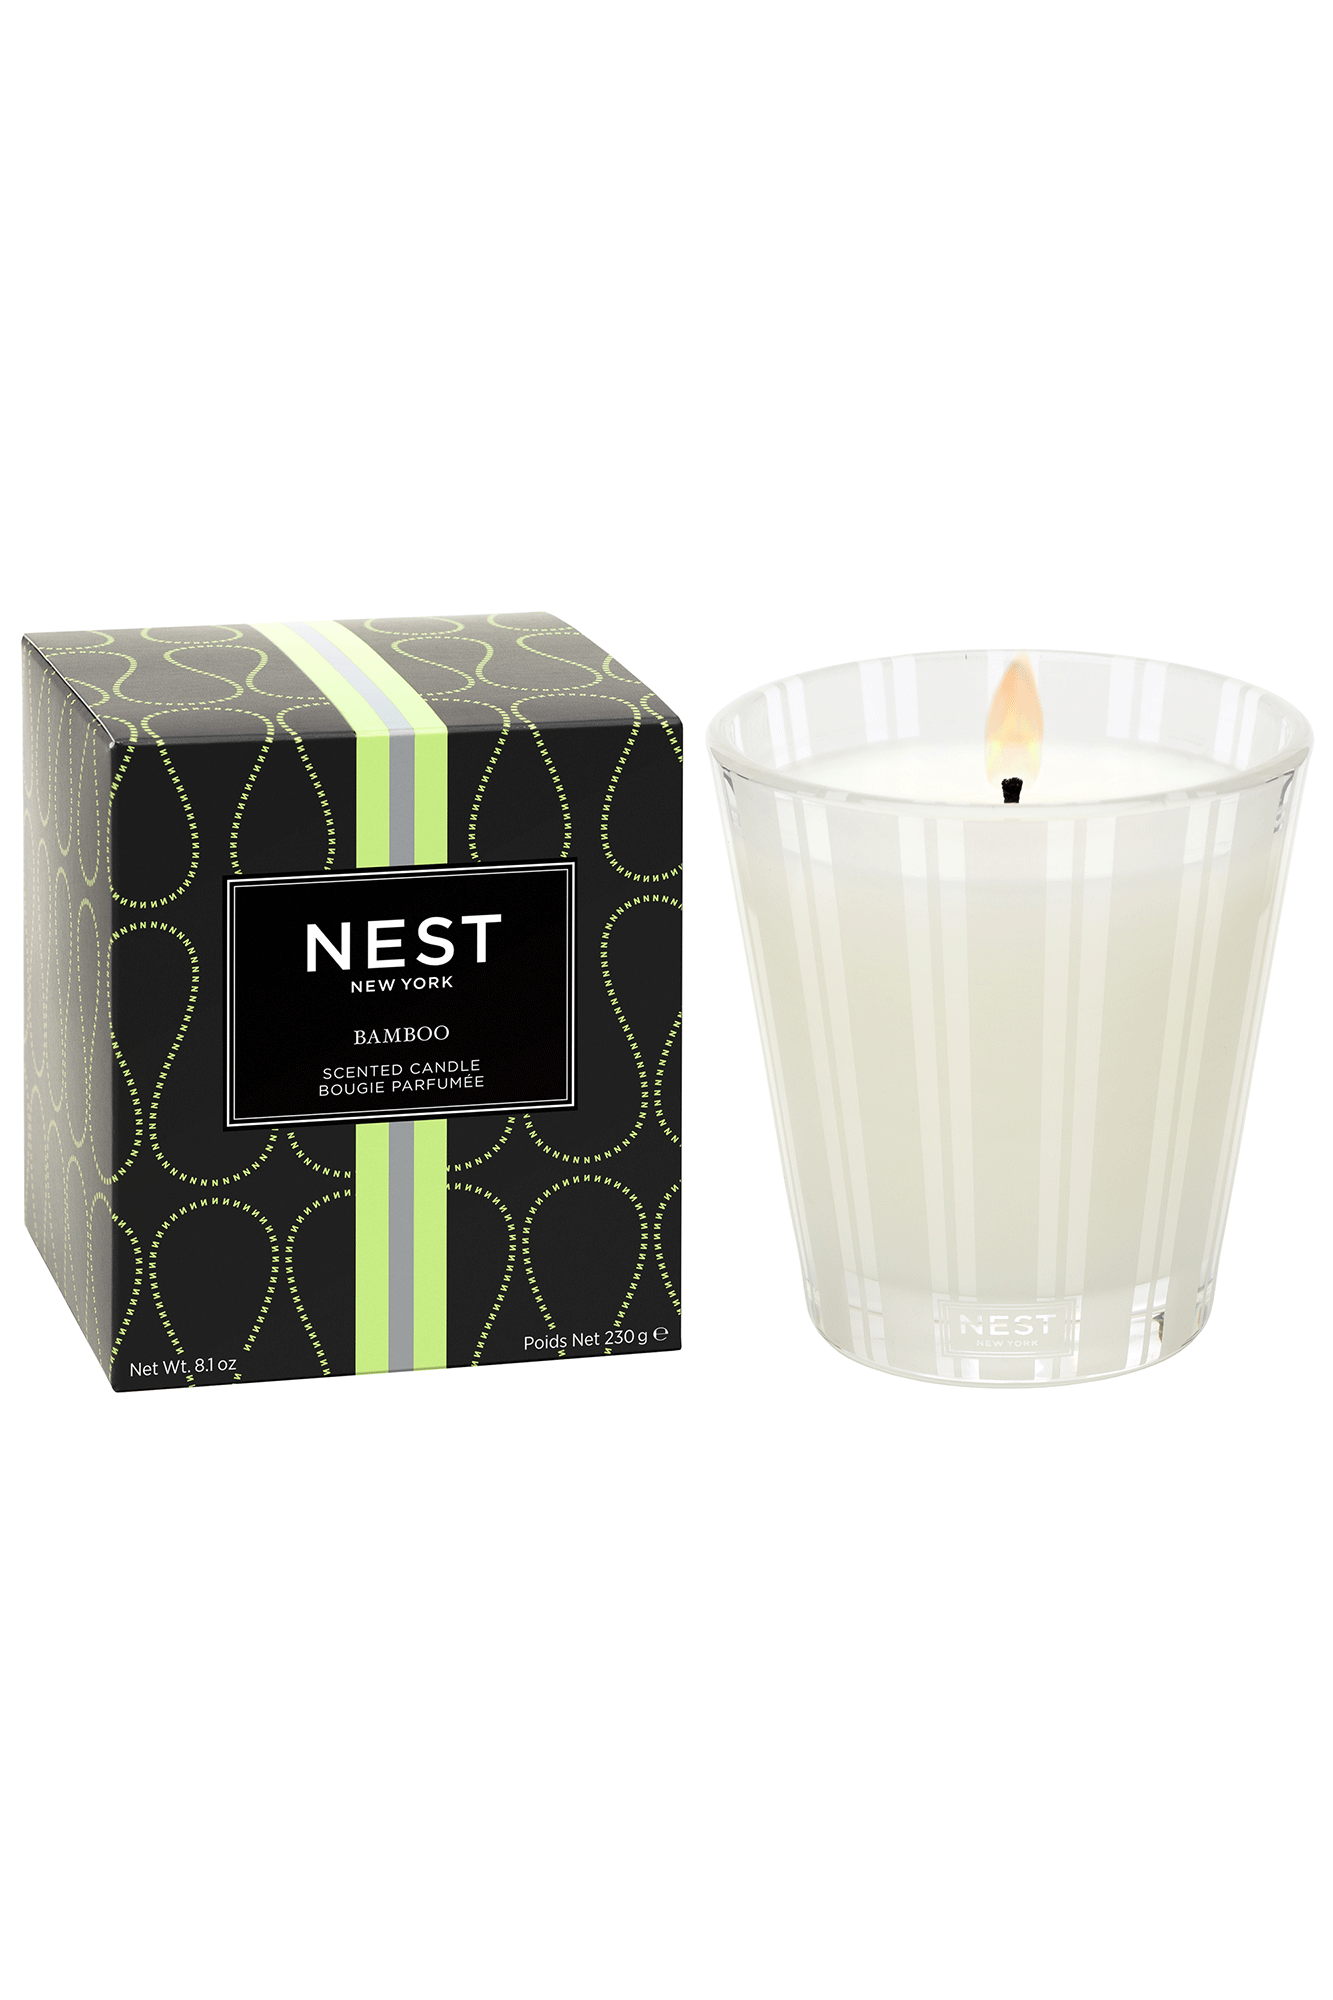 This Bamboo Classic Candle from Nest combines white florals and several green notes with hints of citrus to create a signature aroma of a welcoming garden. The iconic scent in this bestselling candle is sure to add a pleasant and inviting atmosphere to any room.